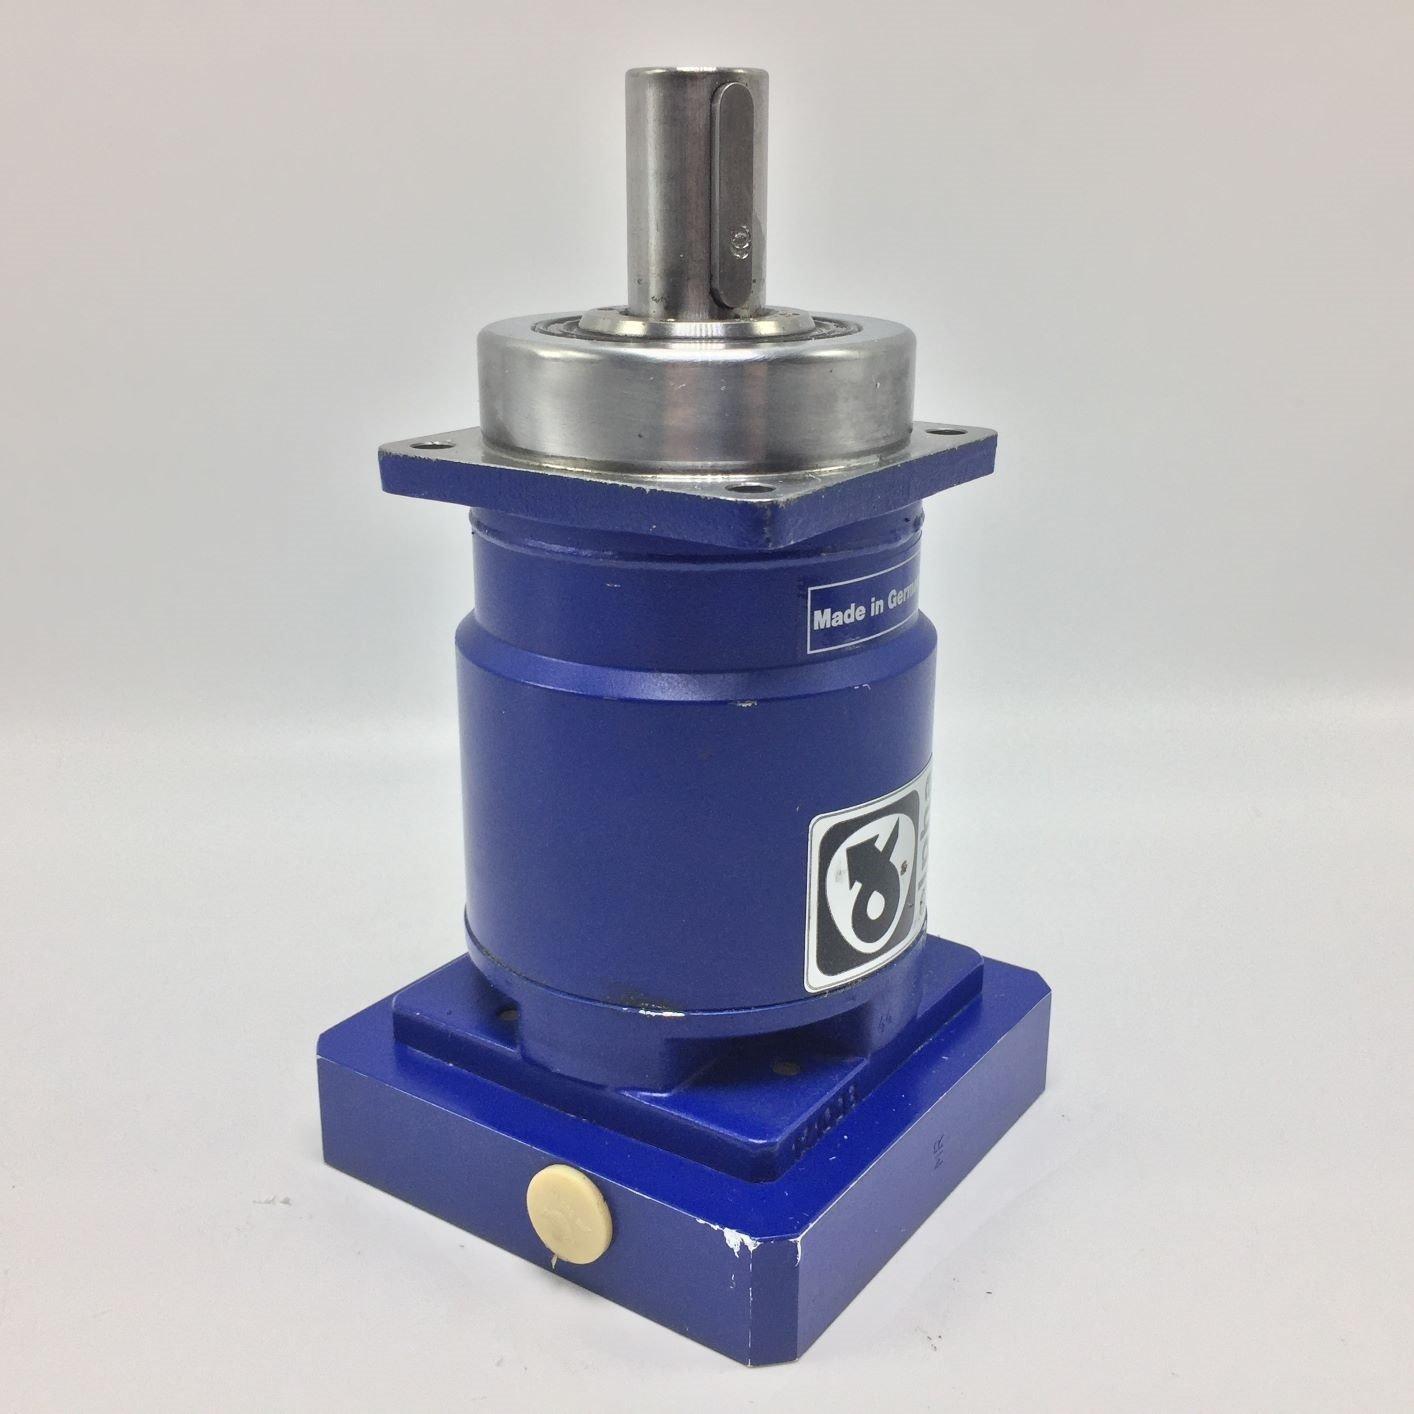 ALPHA WITTENSTEIN SP-075-MF2 PLANETARY GEARBOX TESTED 